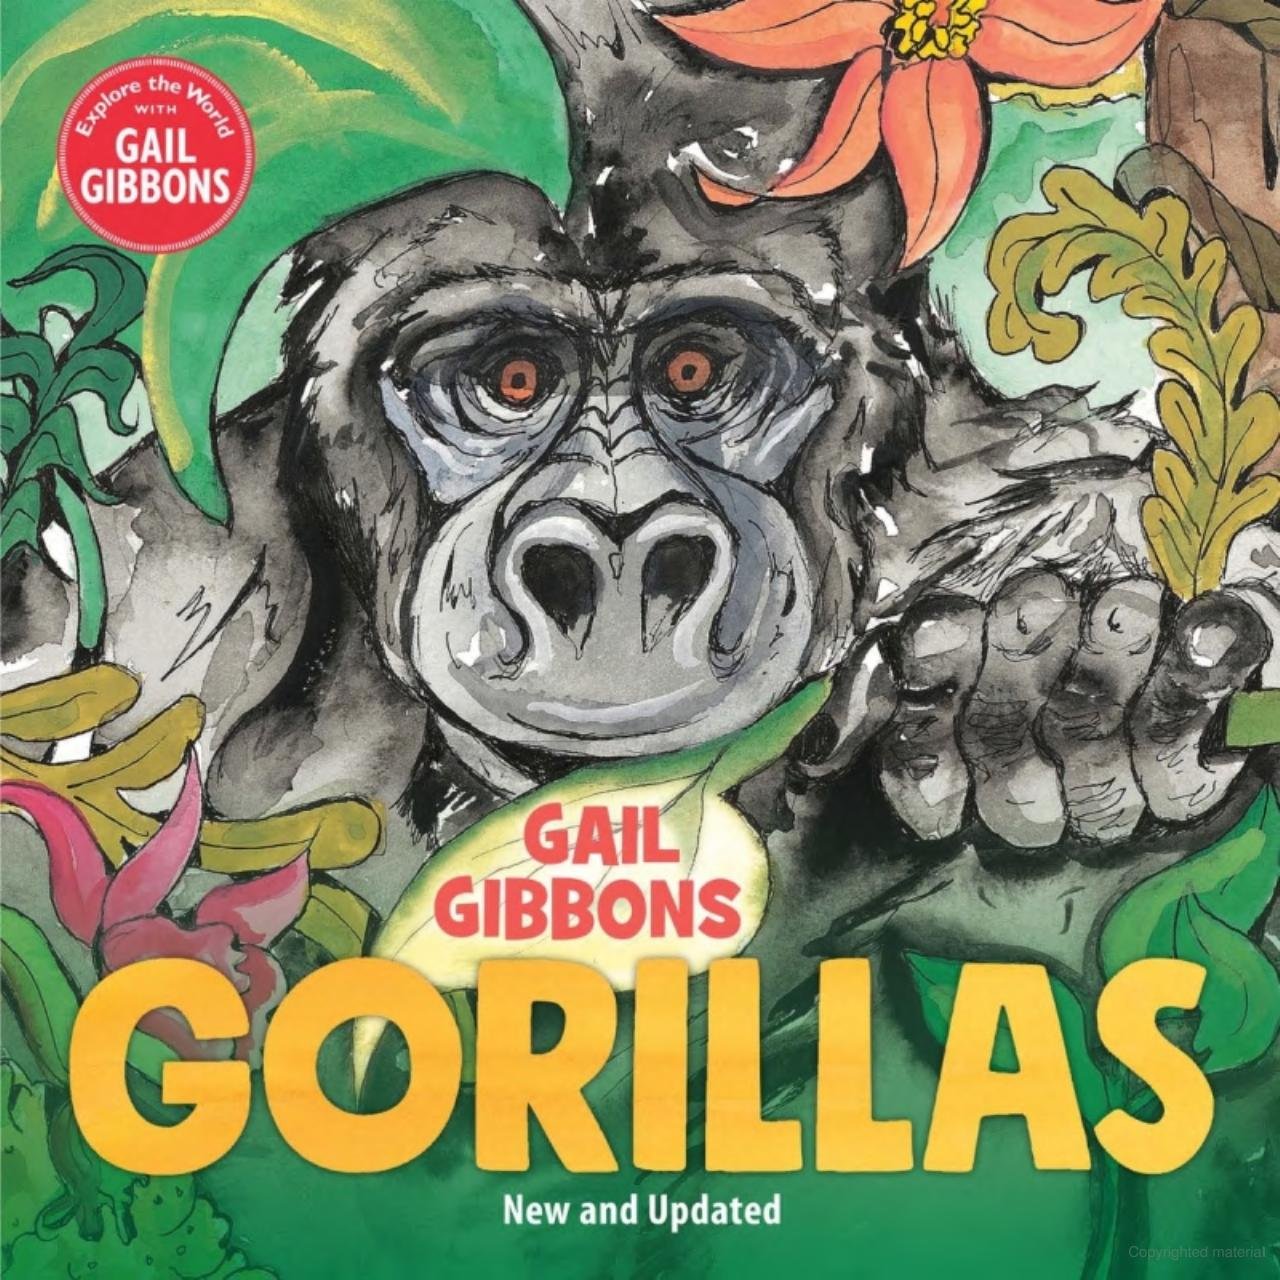 Gorillas by Gail Gibbons